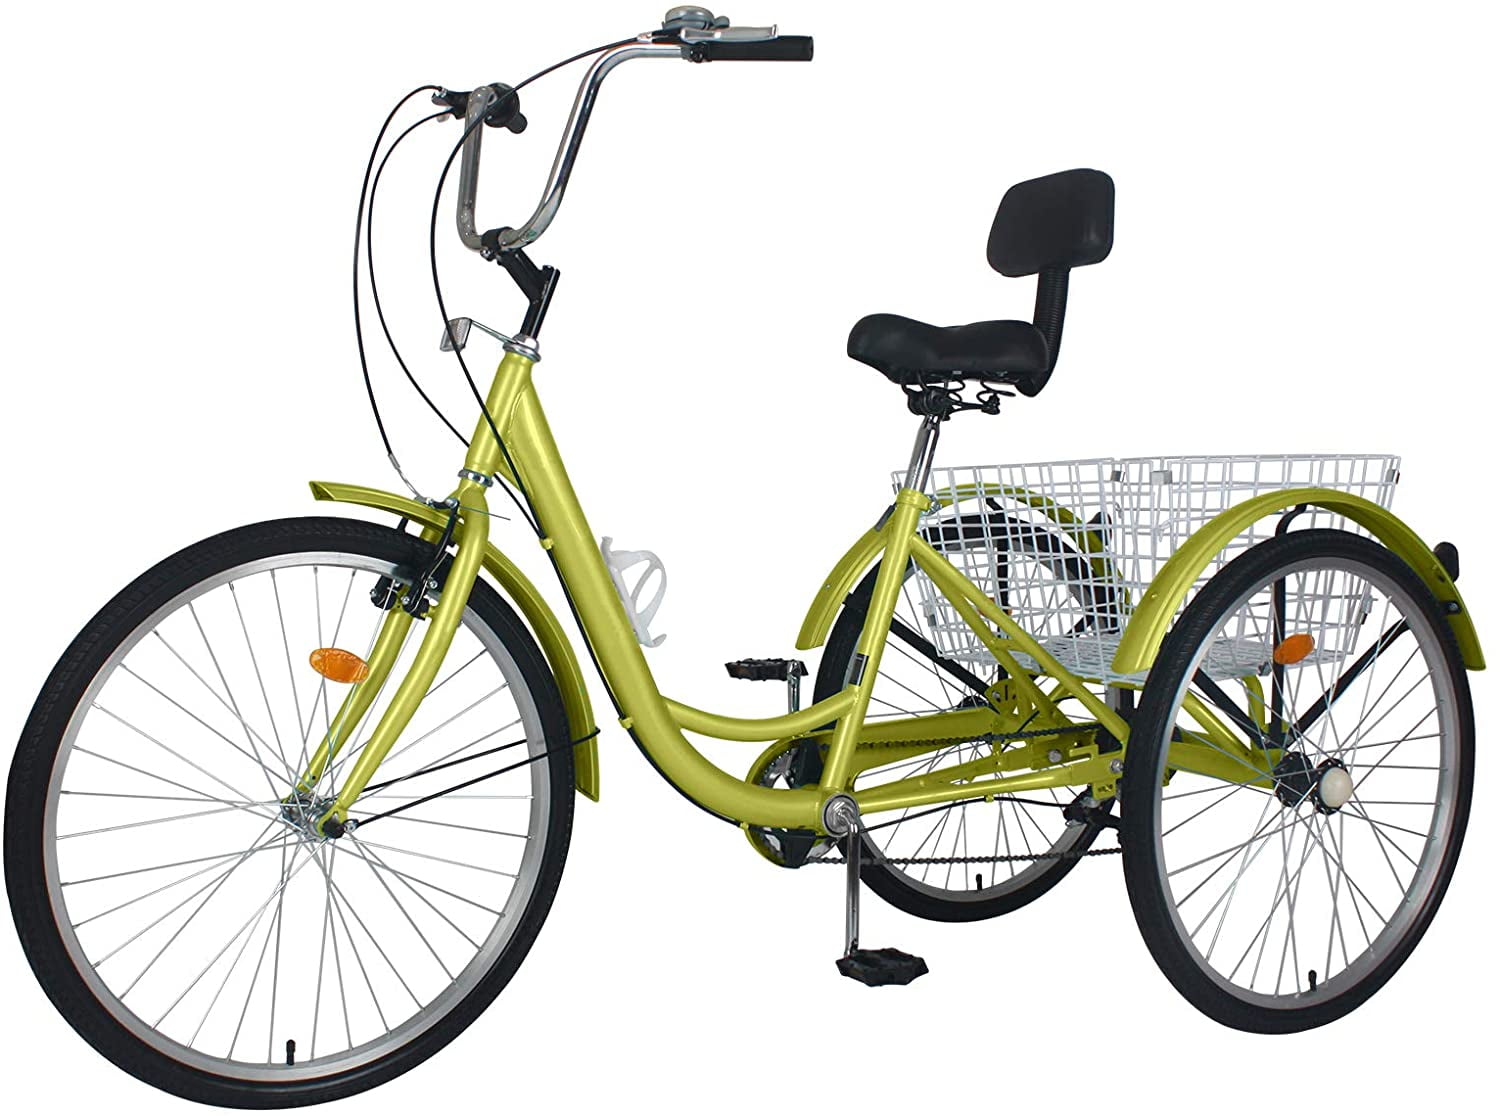 7-Speed 3 Wheel Adult Tricycle 24'' Yellow Trike Bicycle Bike with Large Basket 